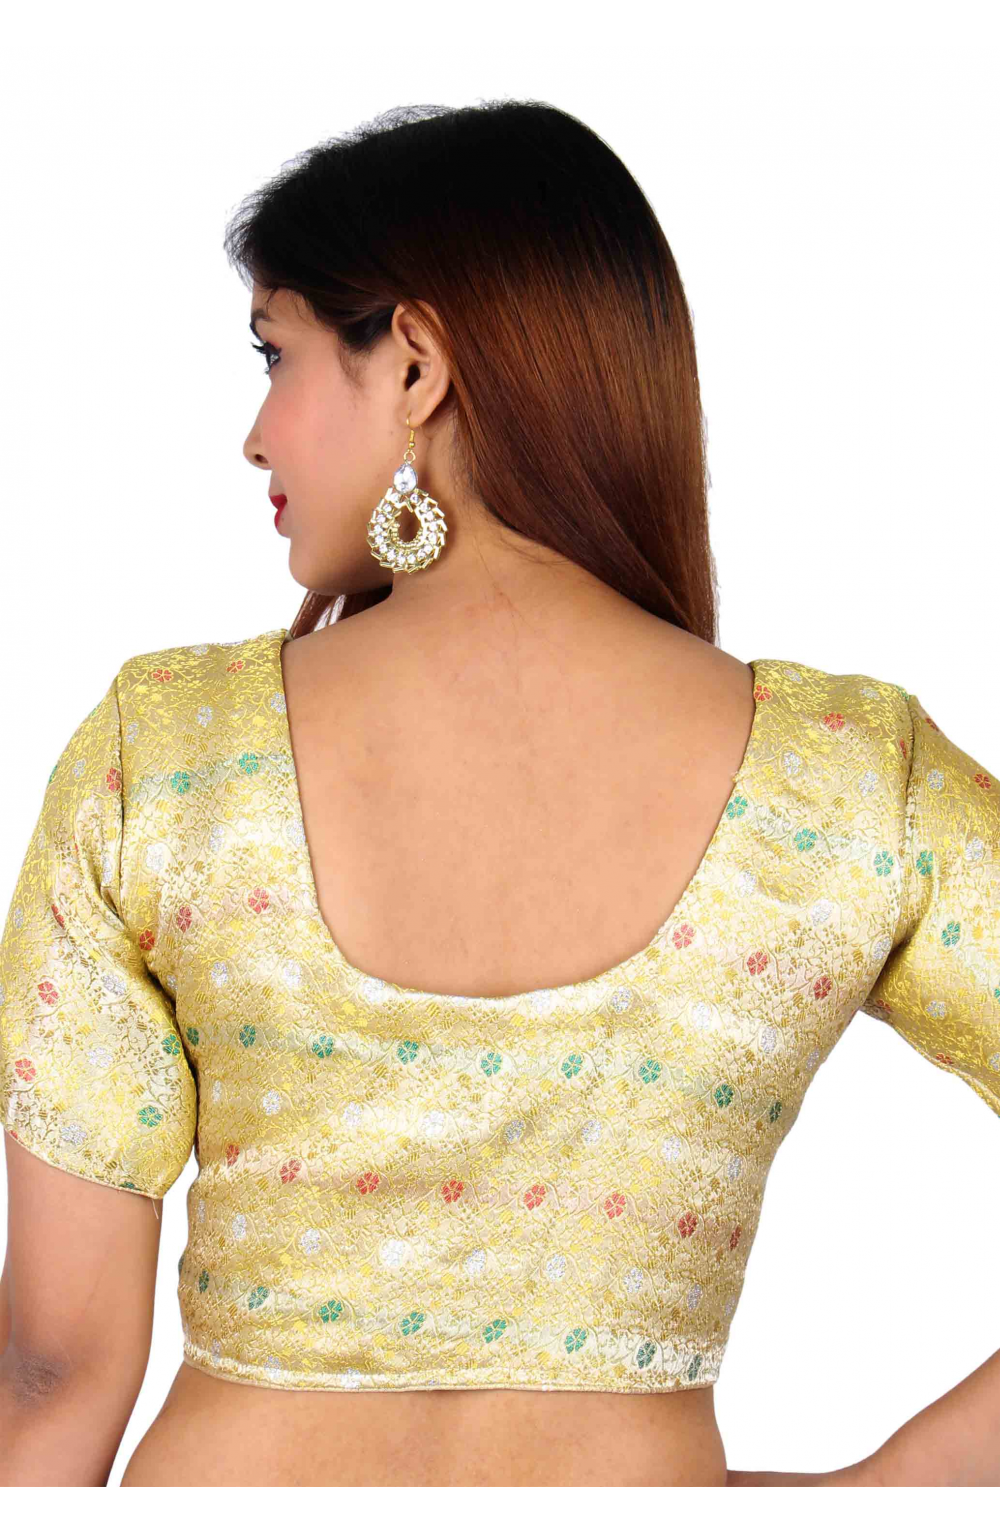 Light Gold Indian Ready Made Saree Blouse In Brocade Fabric Top Choli Ideal Contrast Match